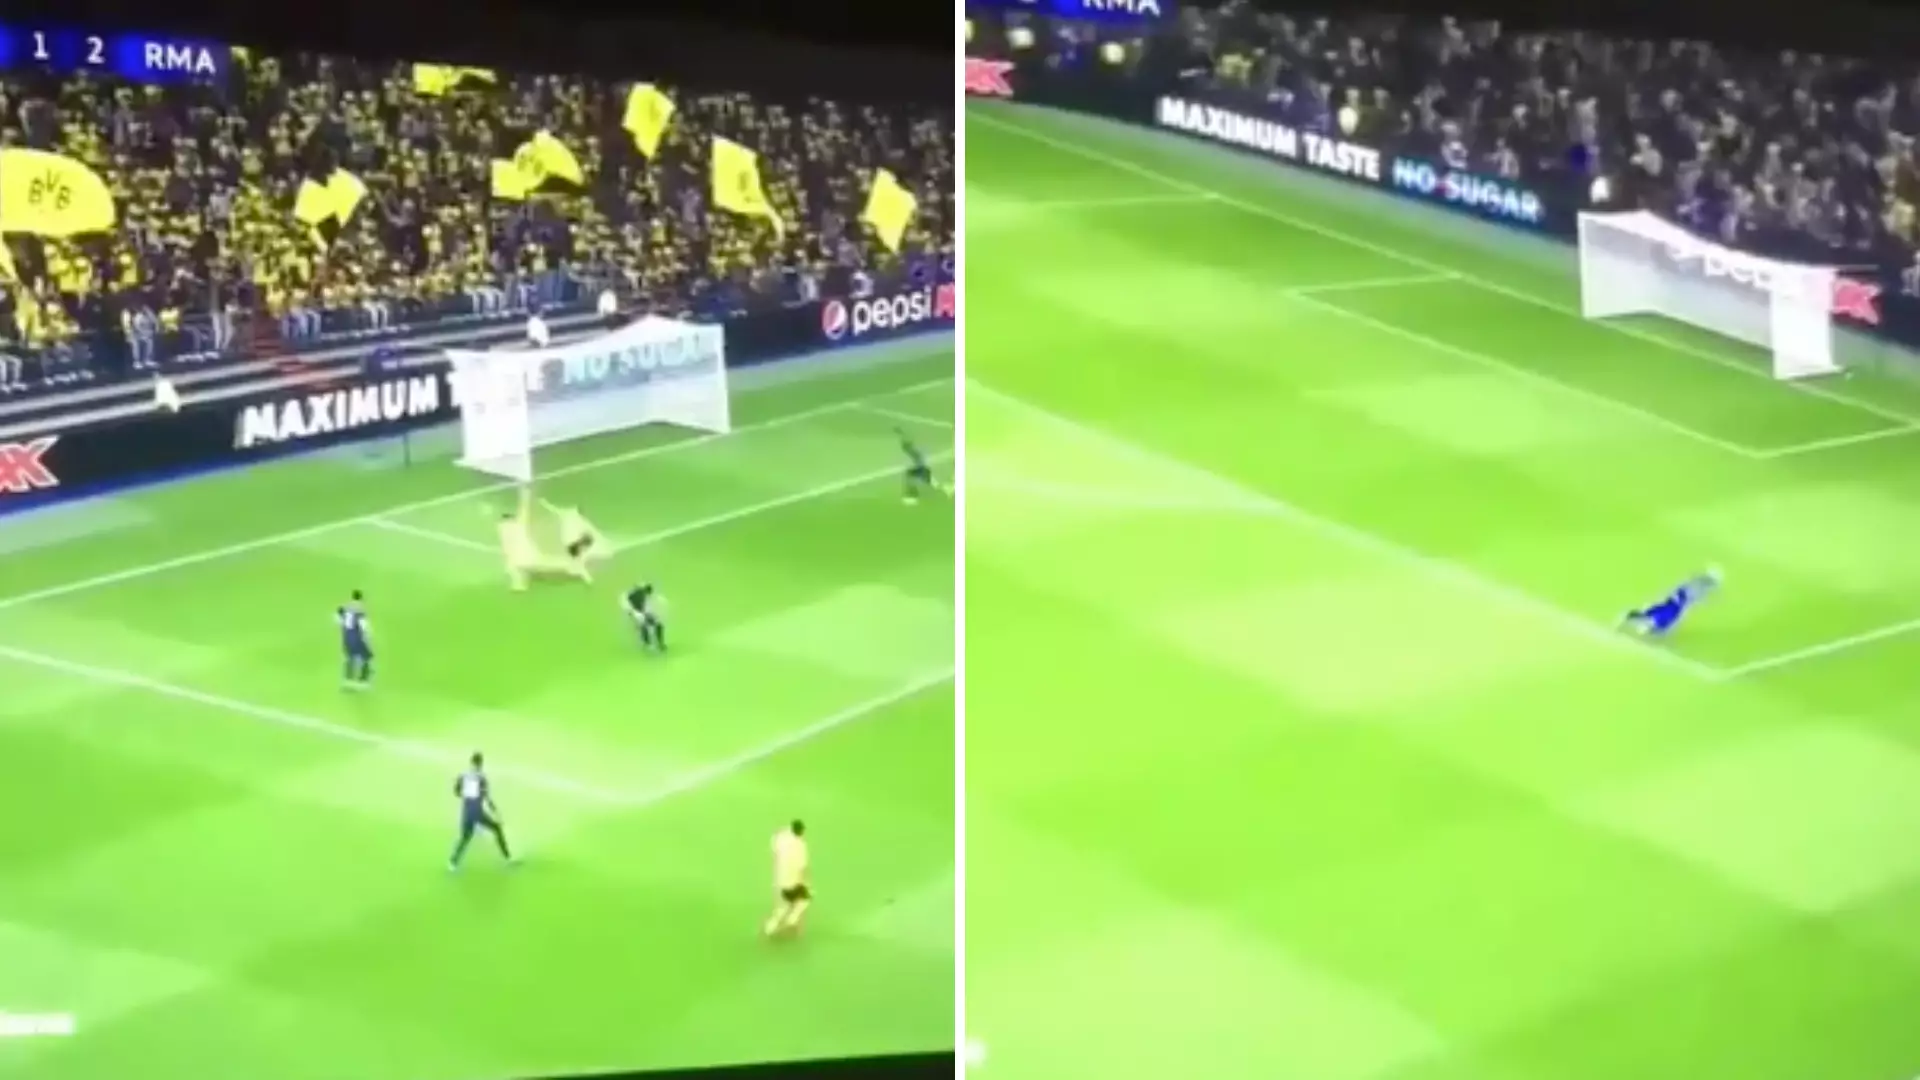 FIFA 20 Player's Bizarre 'Never-Before-Seen Goal' Goes Viral And Leaves Fans Speechless